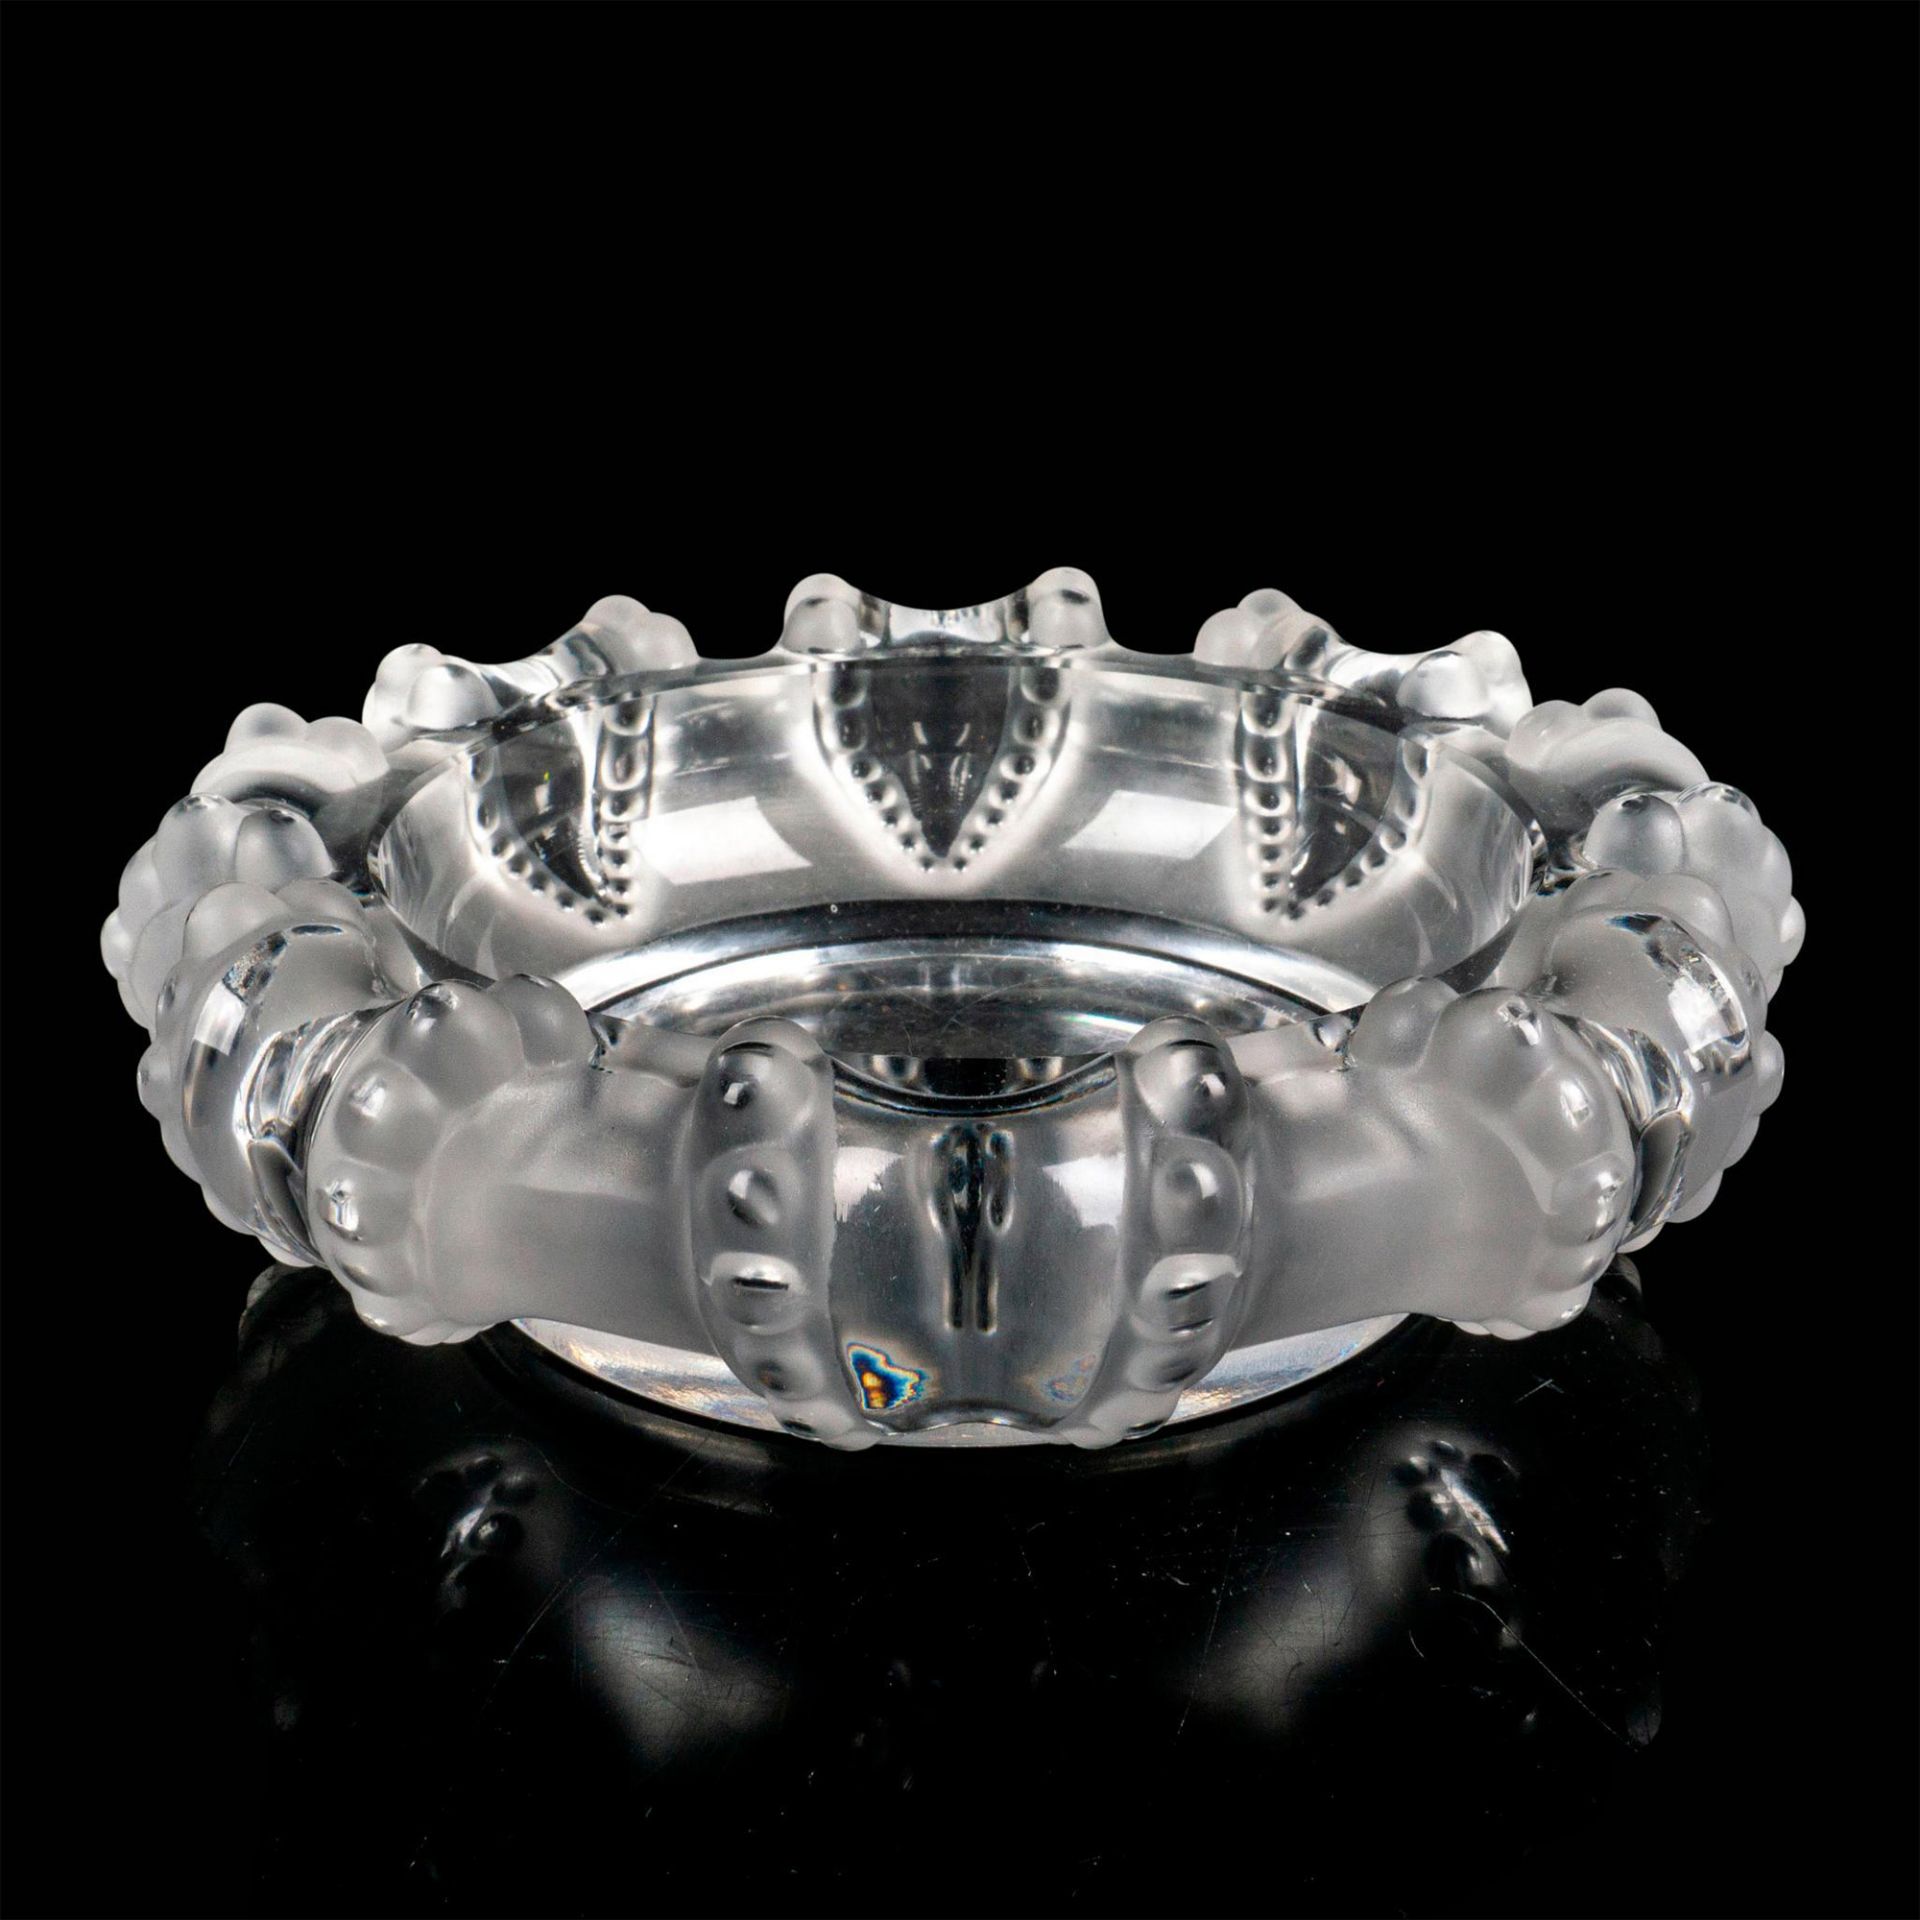 Lalique Crystal Ashtray, Cannes